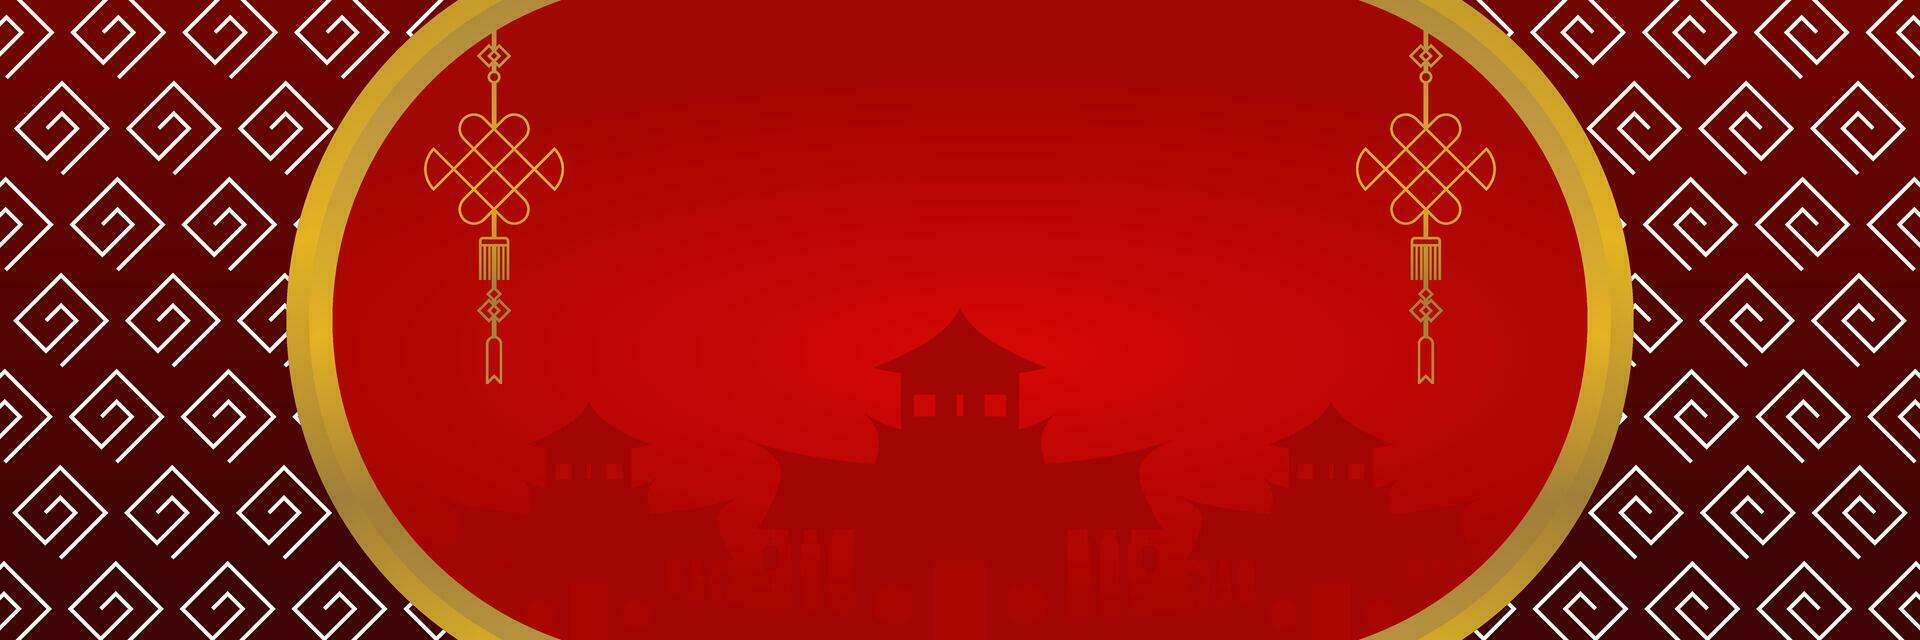 red chinese new year background with temple silhouette decoration. free copy space area design. vector design for banner, poster, greeting card, social media, web.